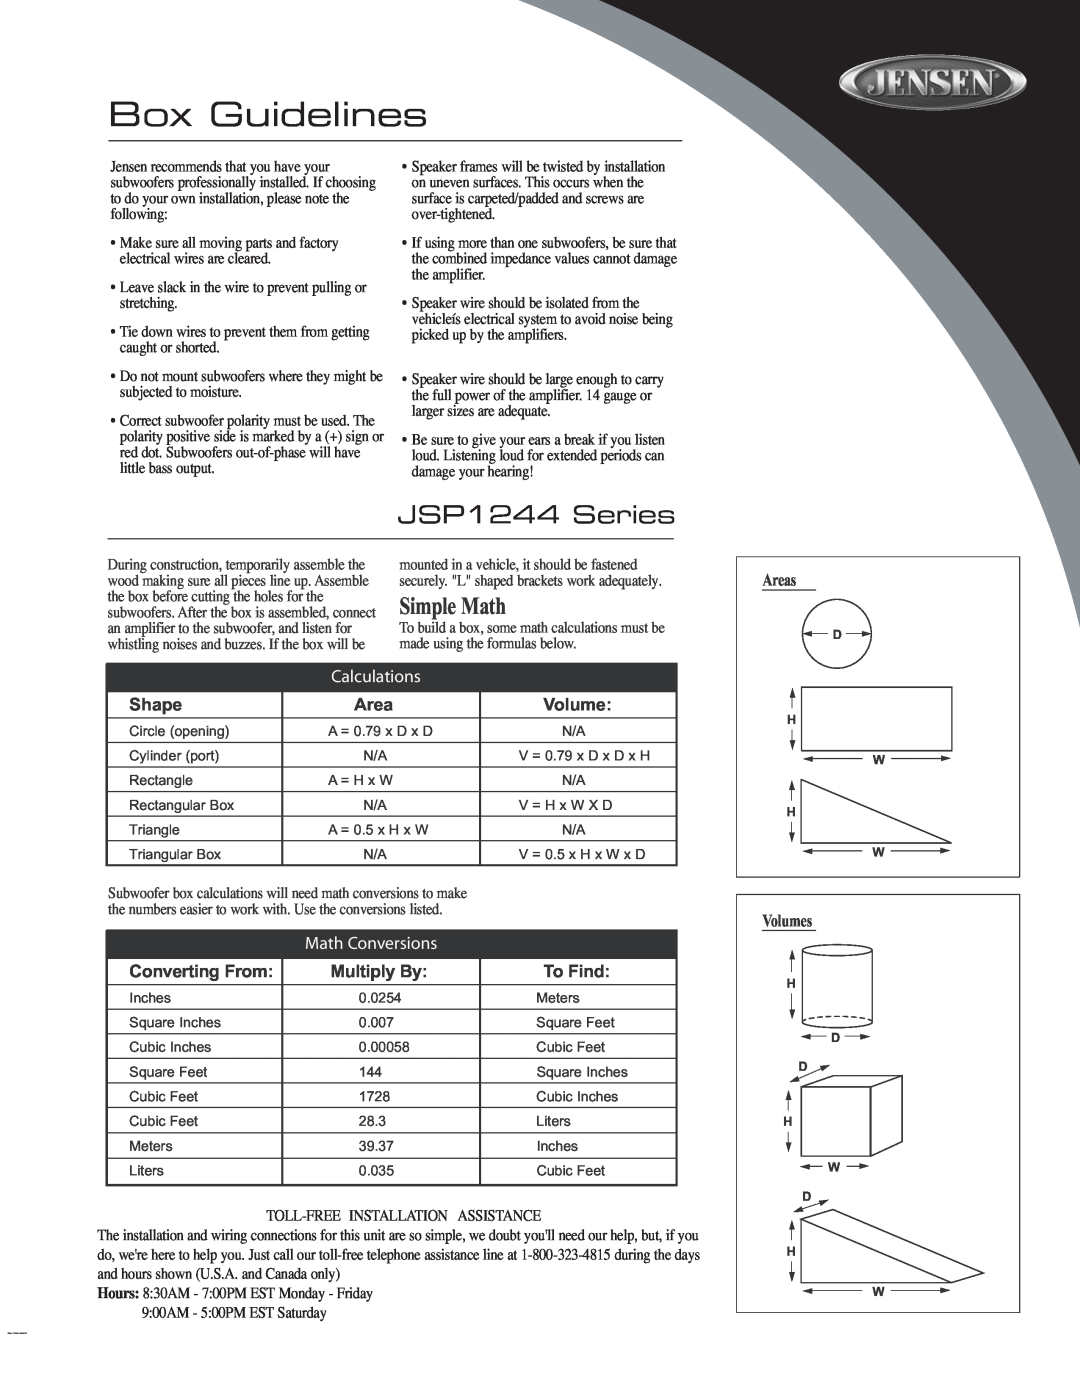 Jensen Box Guidelines, JSP1244 Series, Simple Math, Calculations, Shape, Area, Volume, Math Conversions, Multiply By 